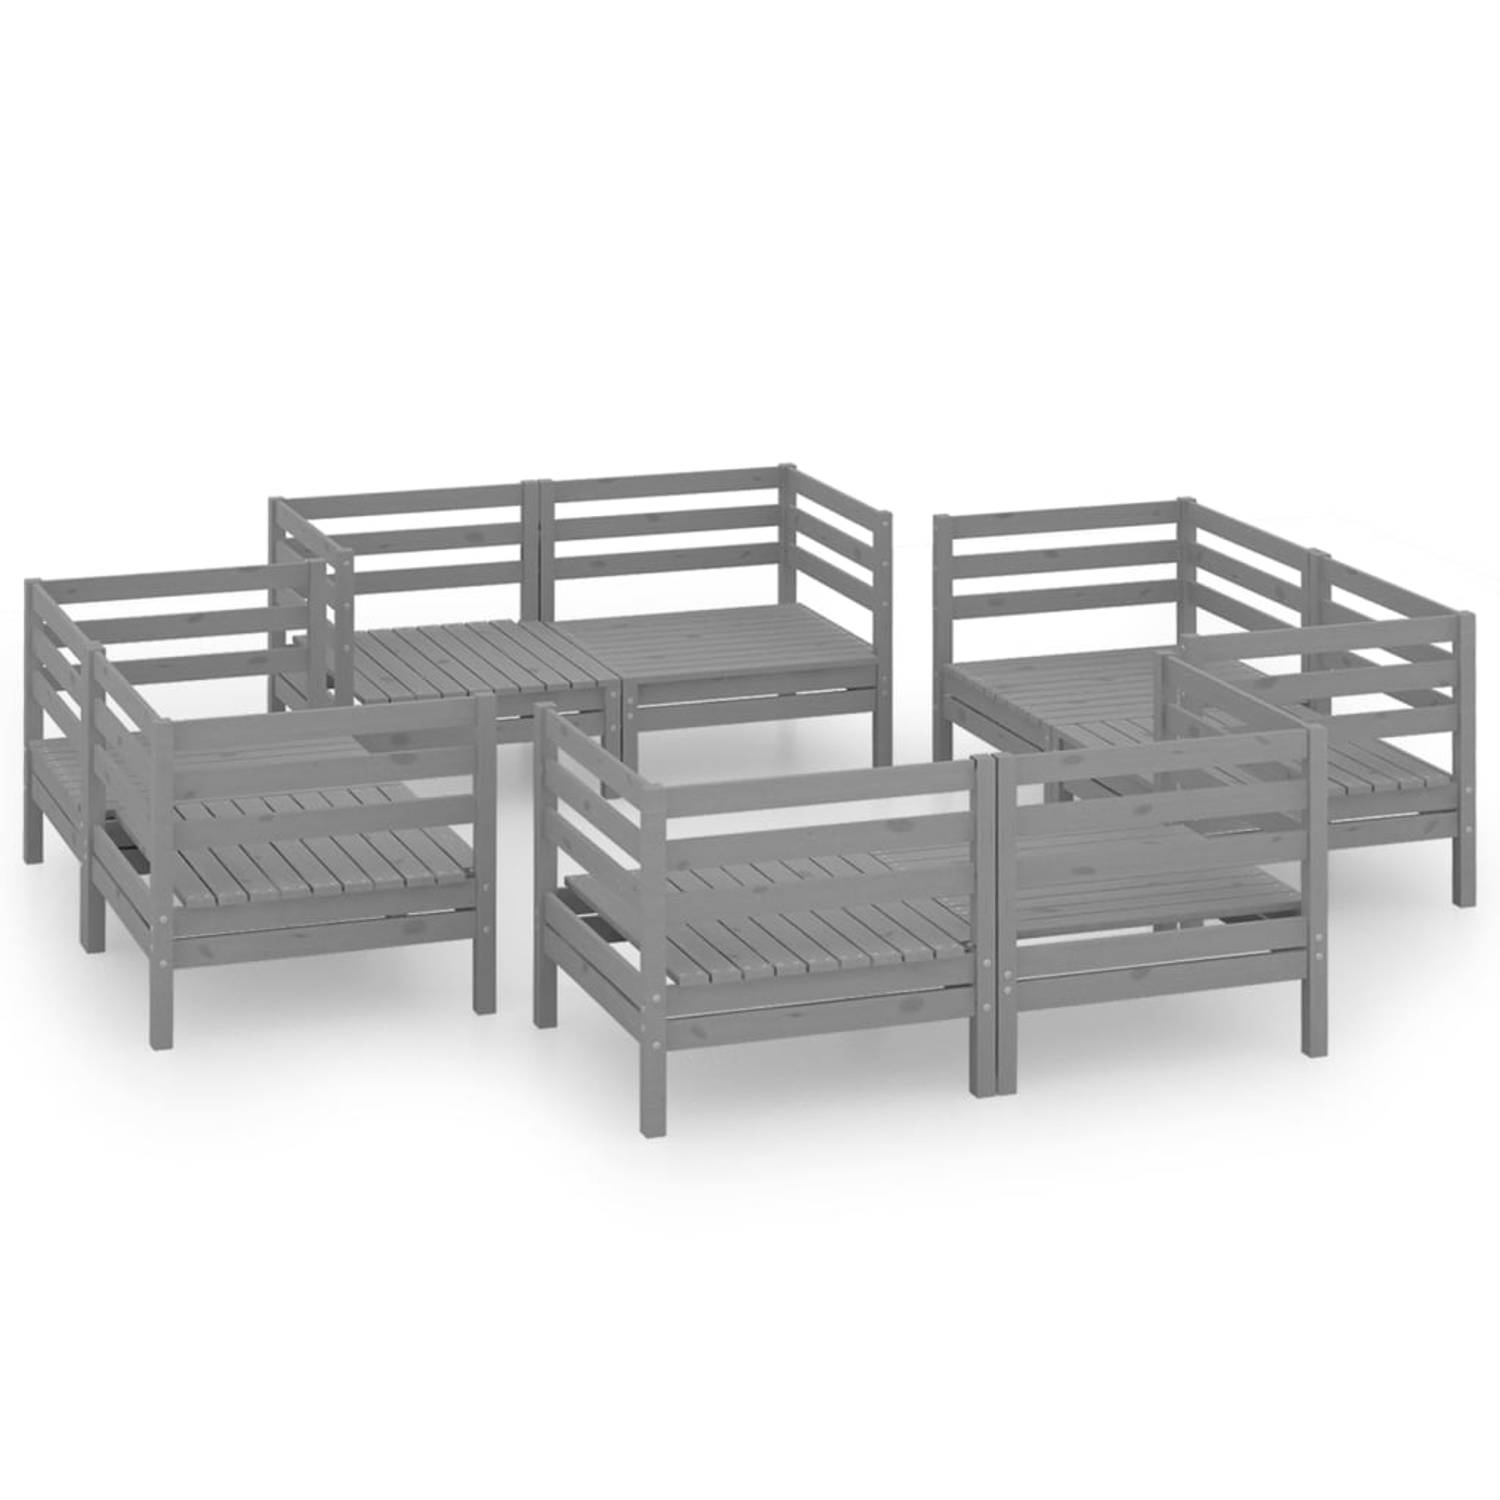 The Living Store 8-delige Loungeset massief grenenhout grijs - Tuinset